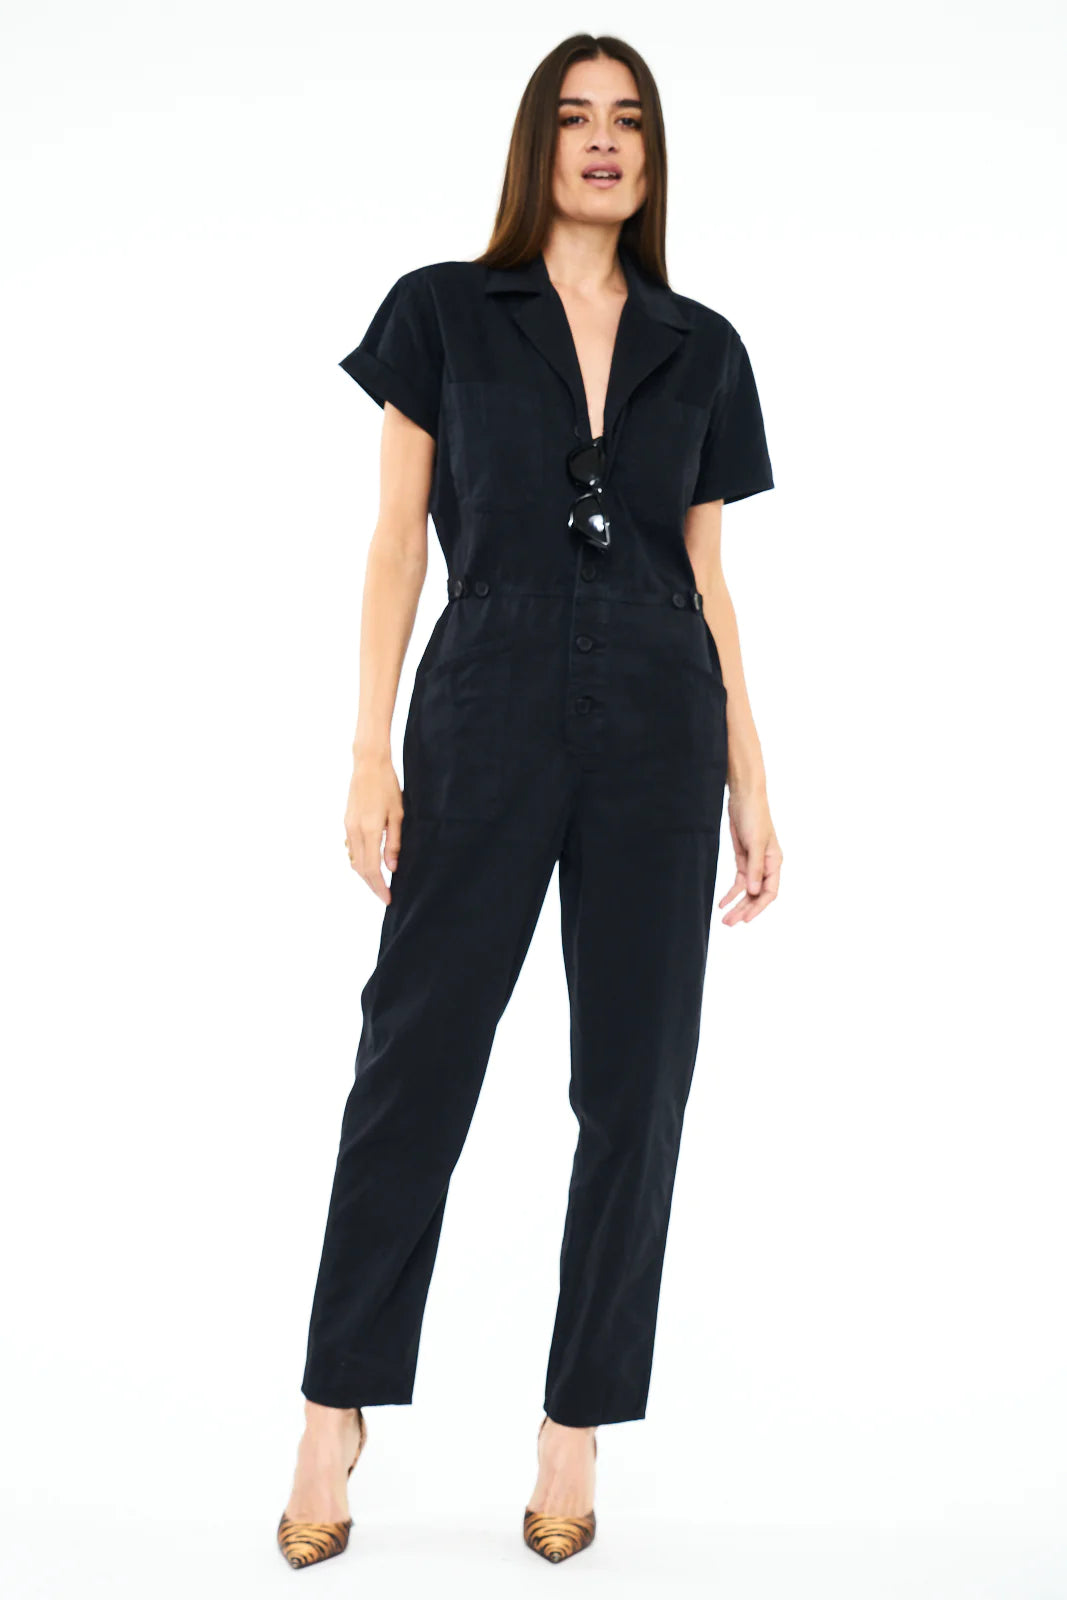 Grover Short Sleeve Field Suit - Fade to Black